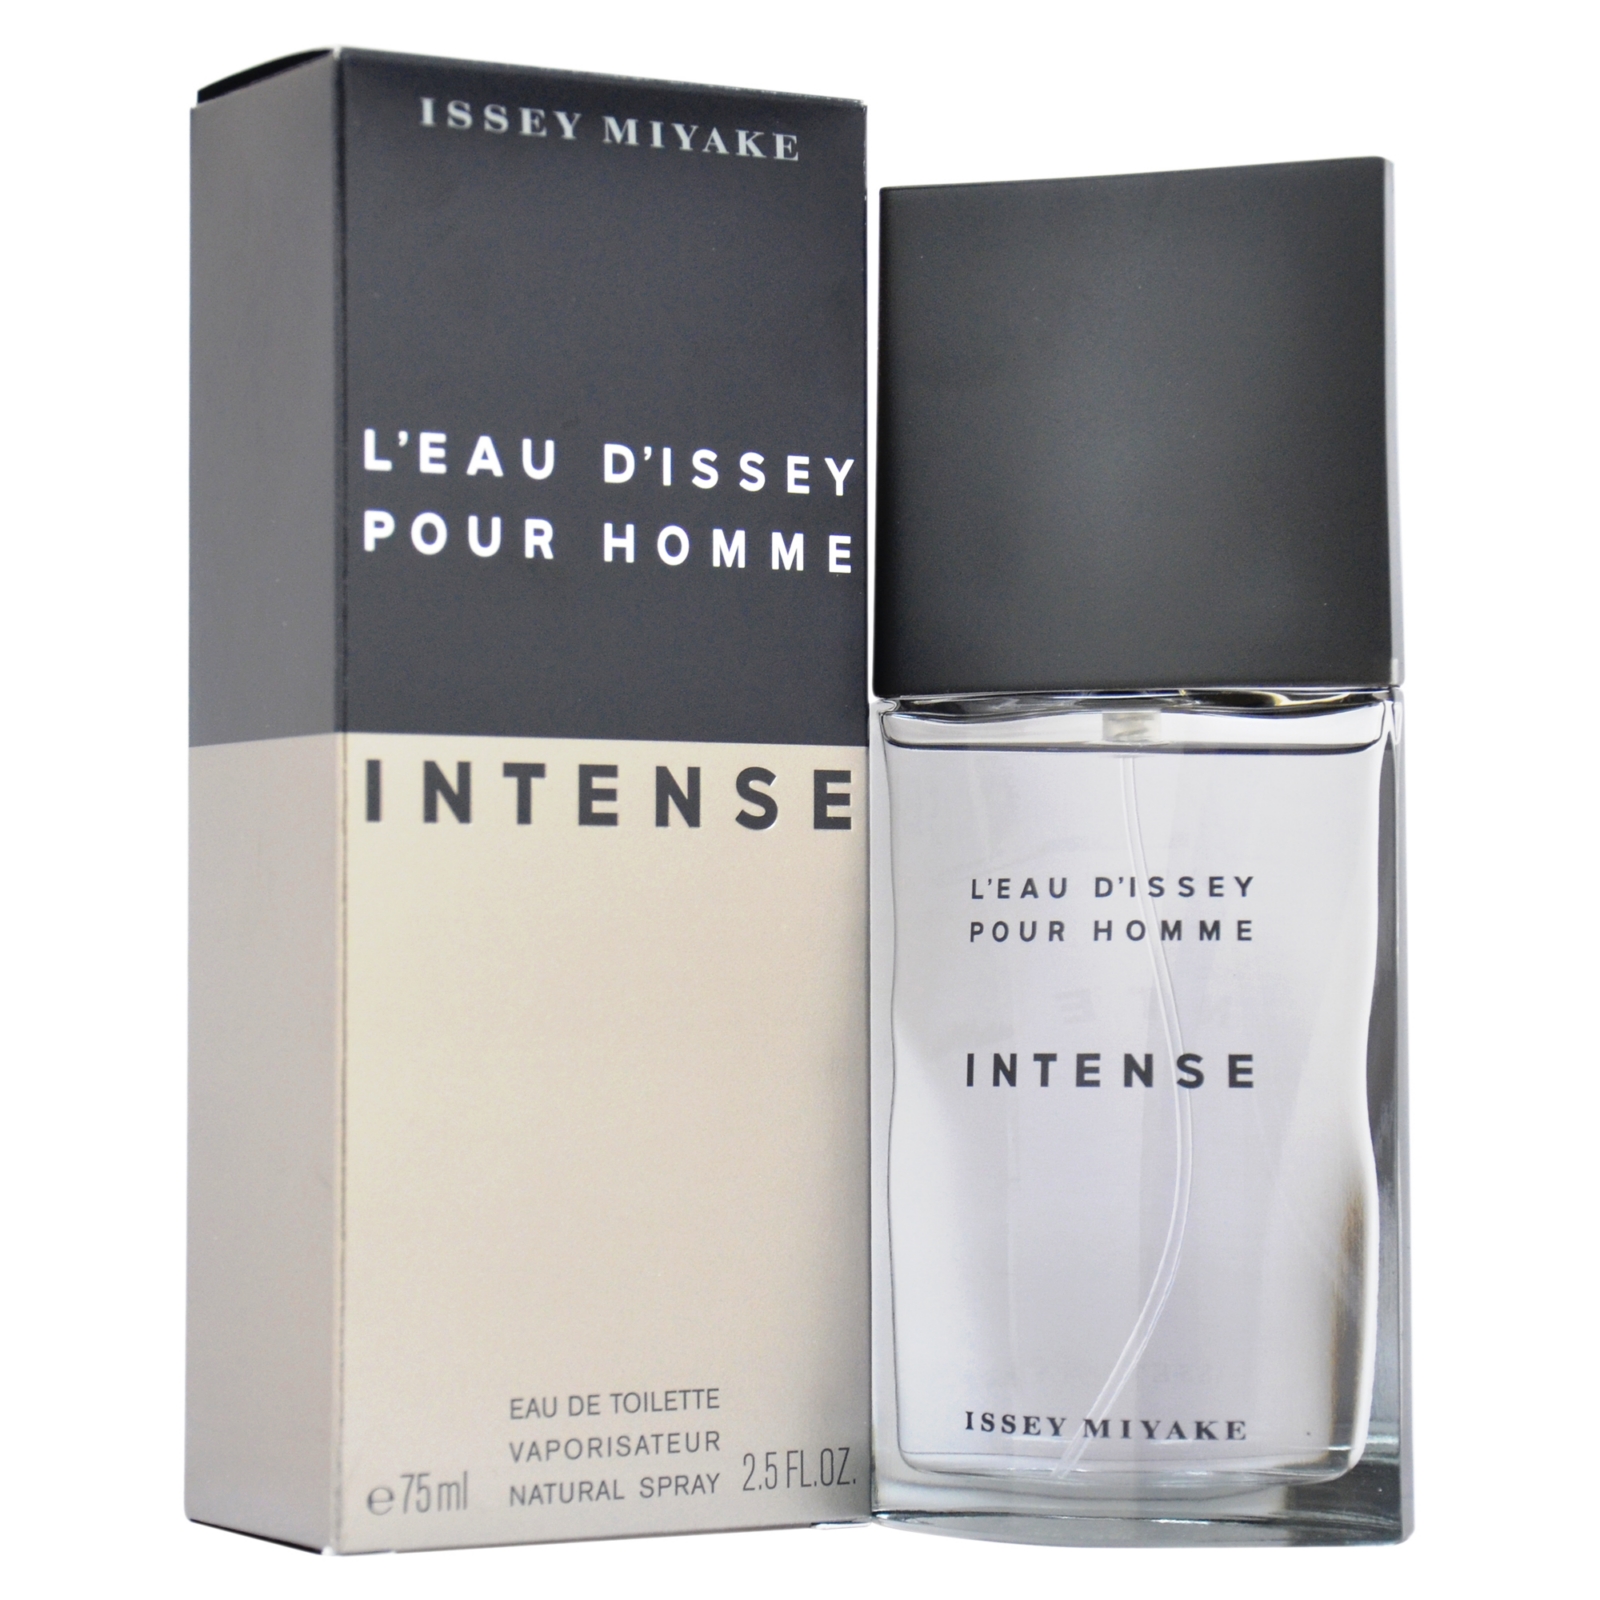 Issey miyake L'eau D'issey Intense by  for Men - 2.5 oz EDT Spray